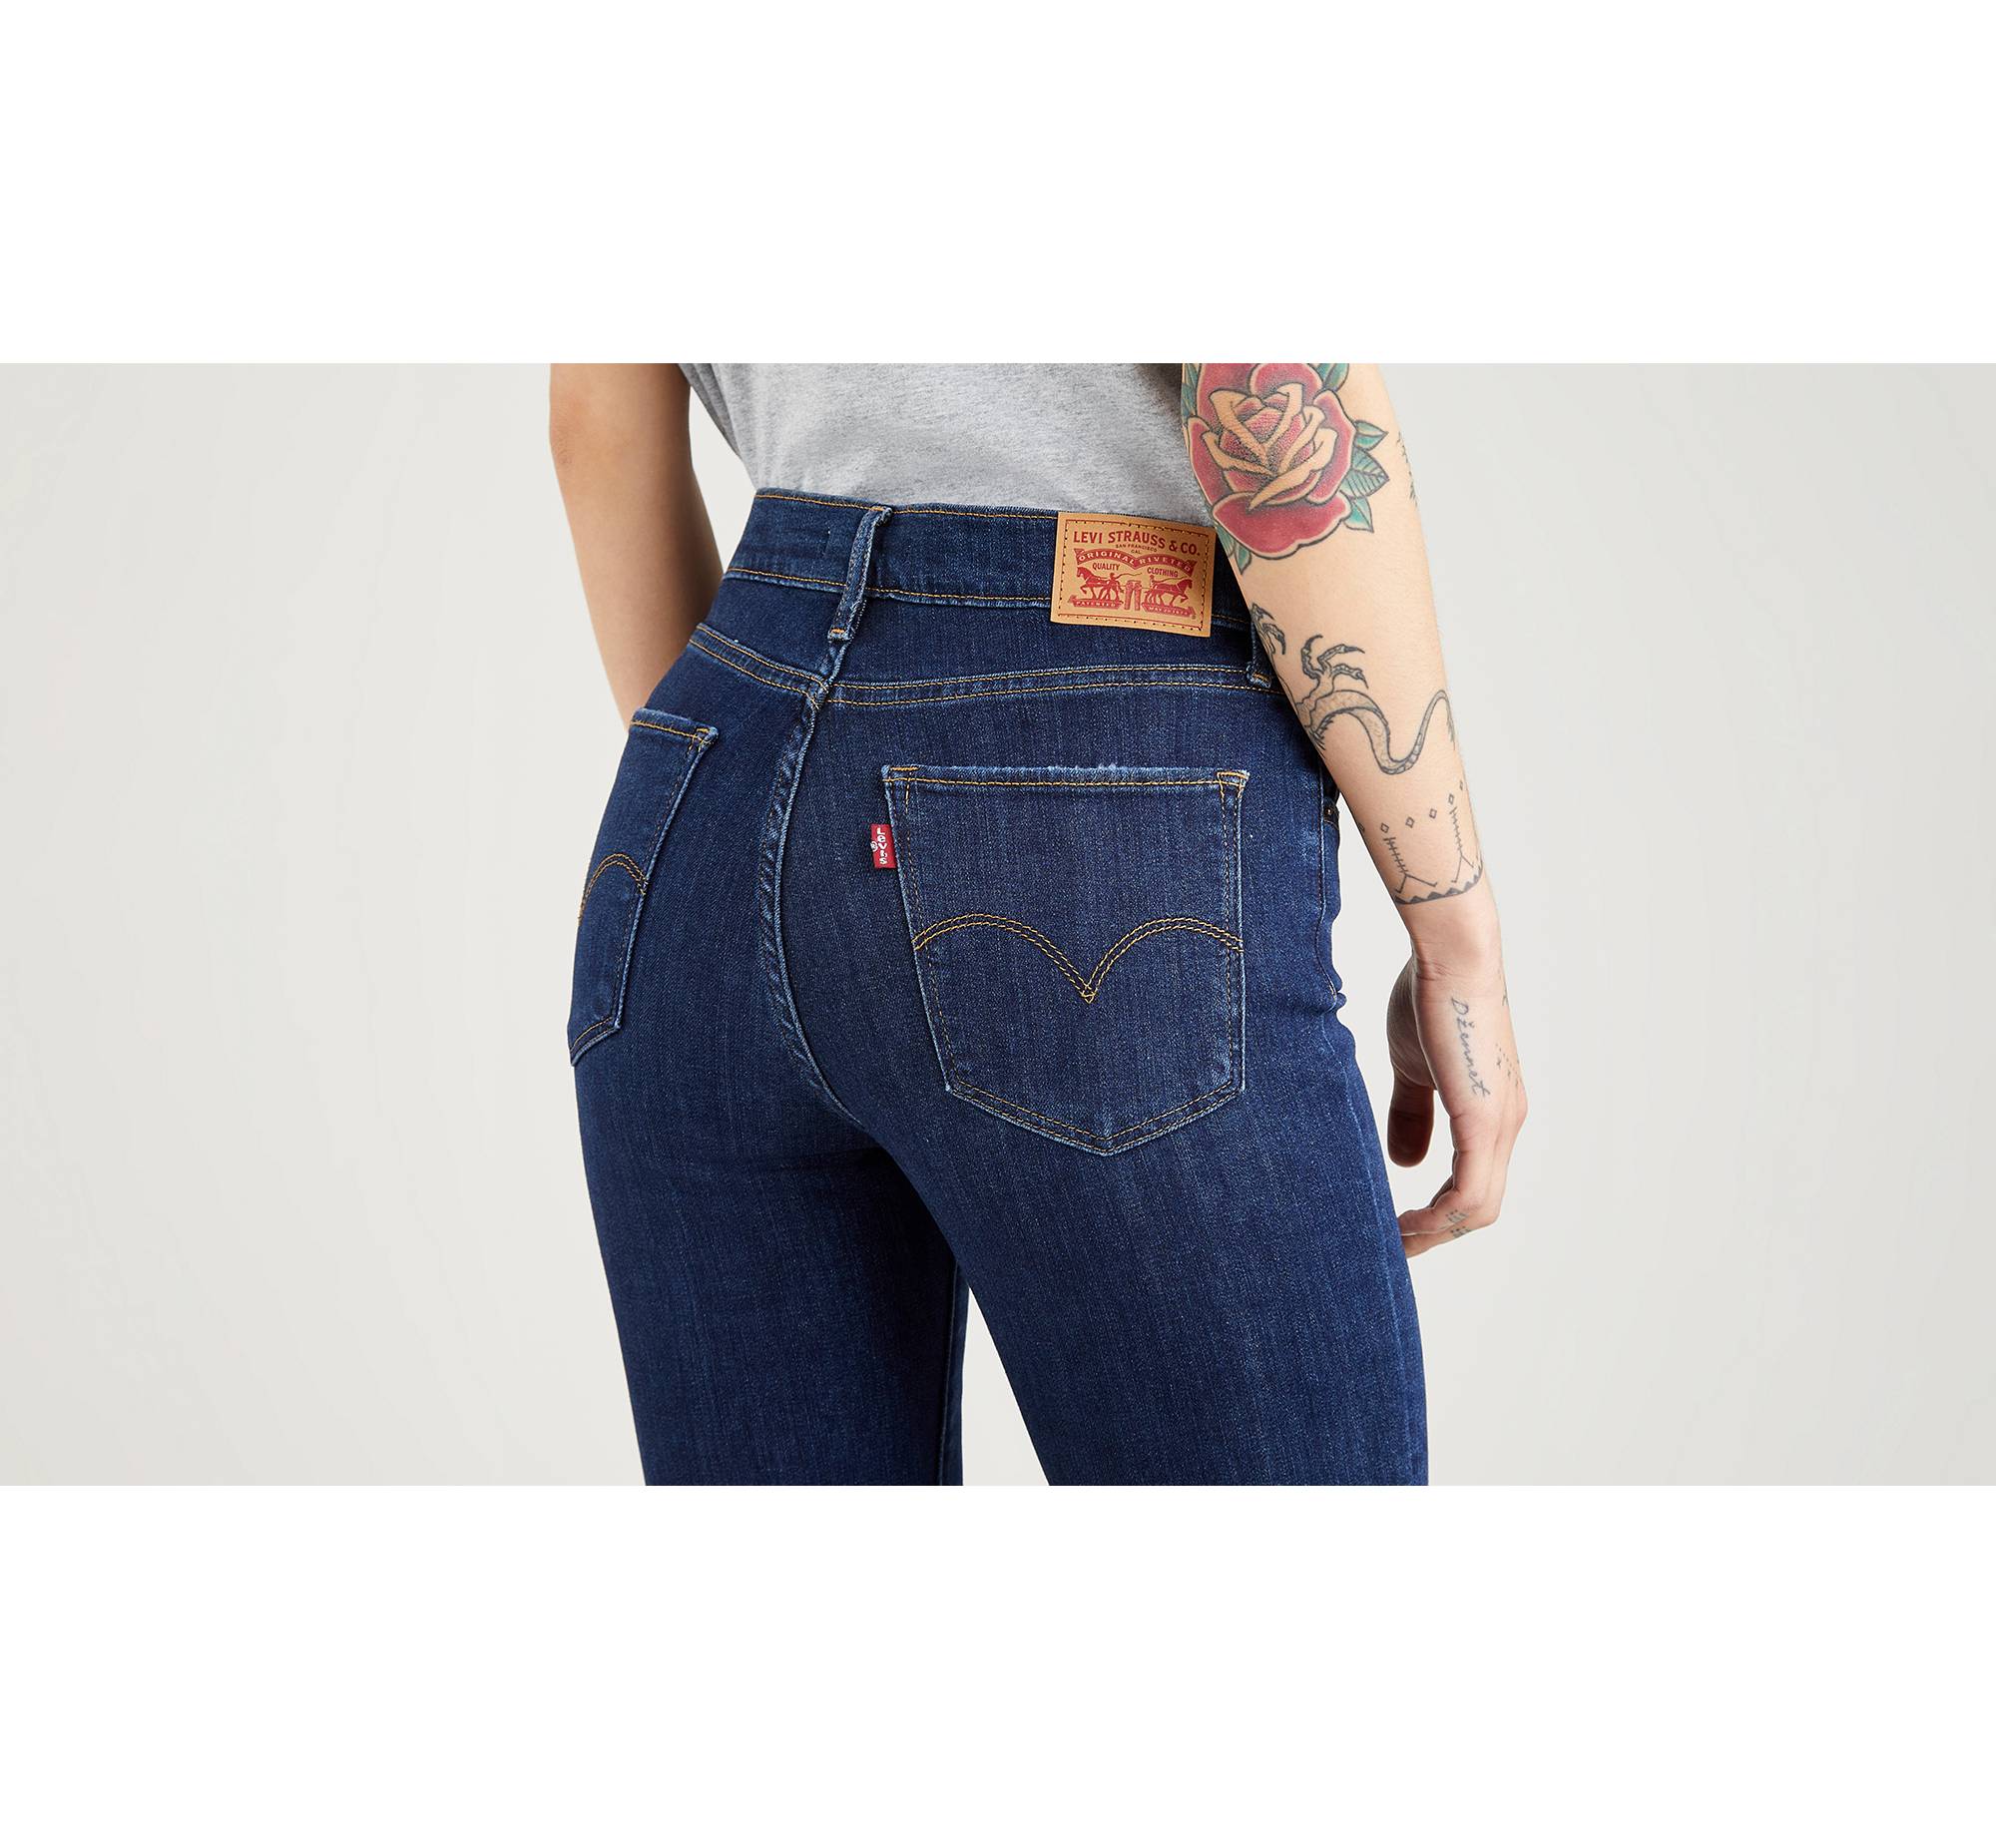 Levi's Women's 724 High Rise Straight Jeans - Chelsea Hour $ 79.5